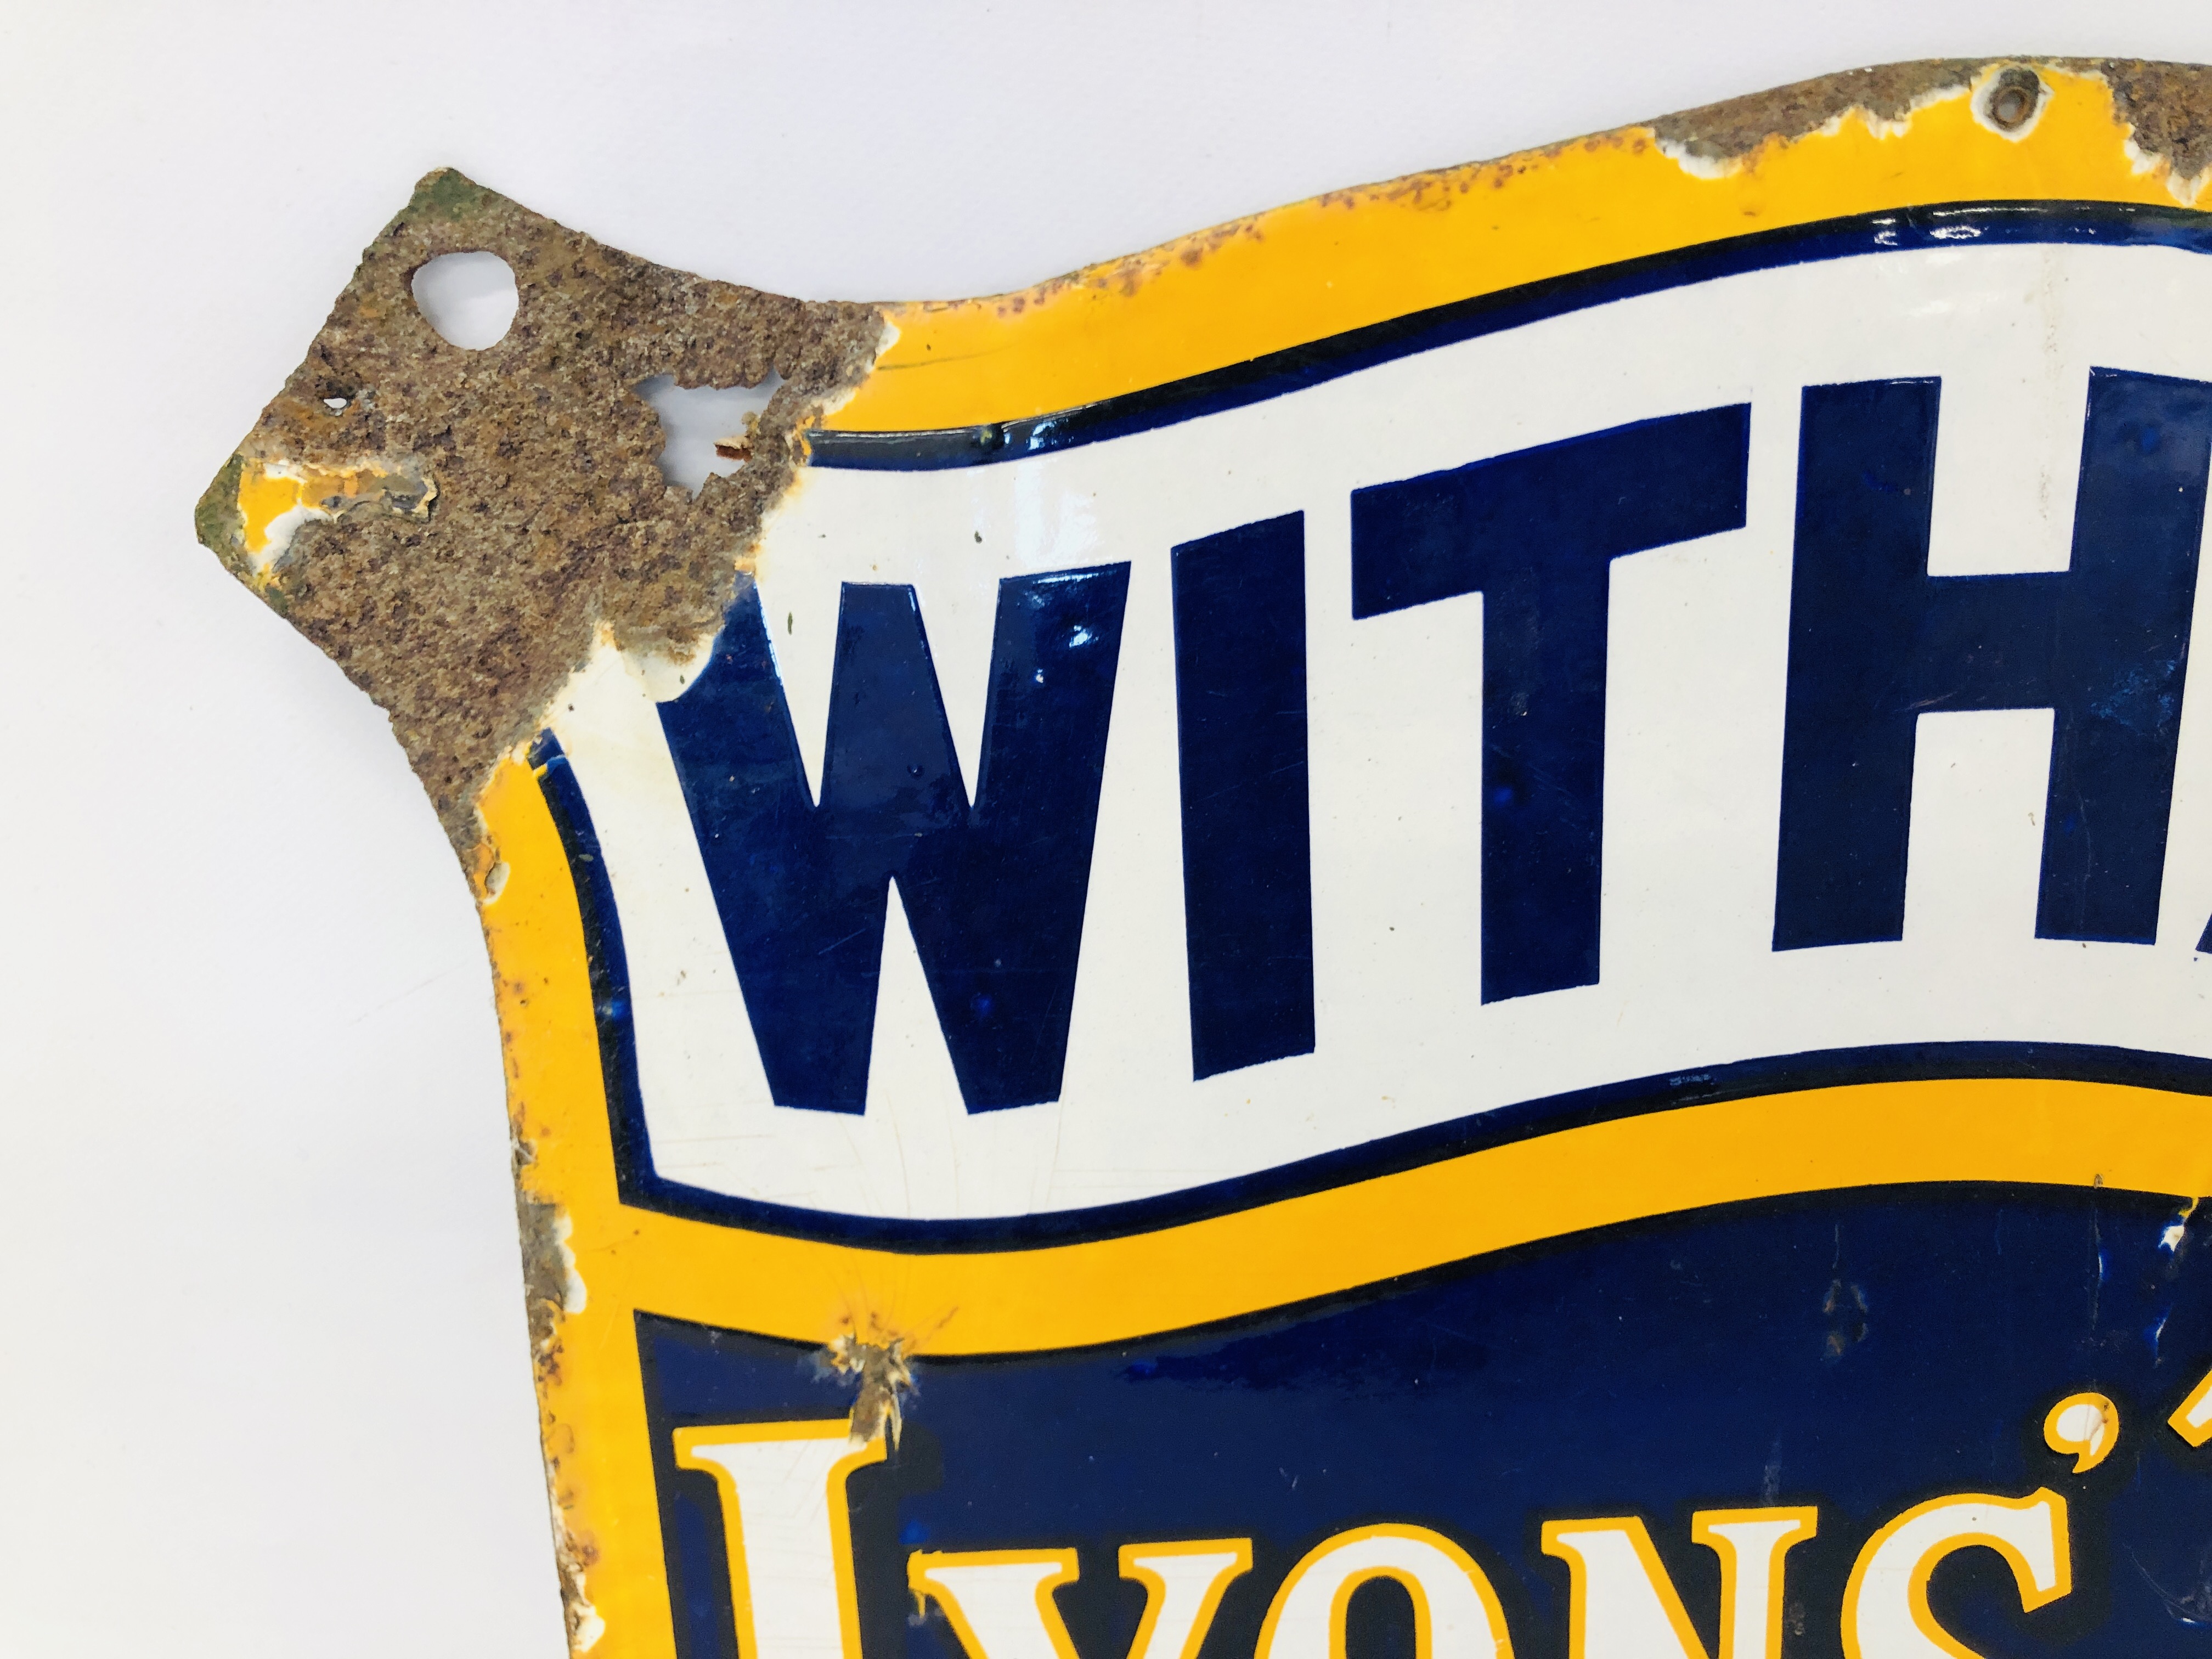 A VINTAGE "WITHAM LYONS' TEA SOLD HERE" ENAMEL ADVERTISING SIGN - W 56CM. H 46CM. - Image 2 of 6